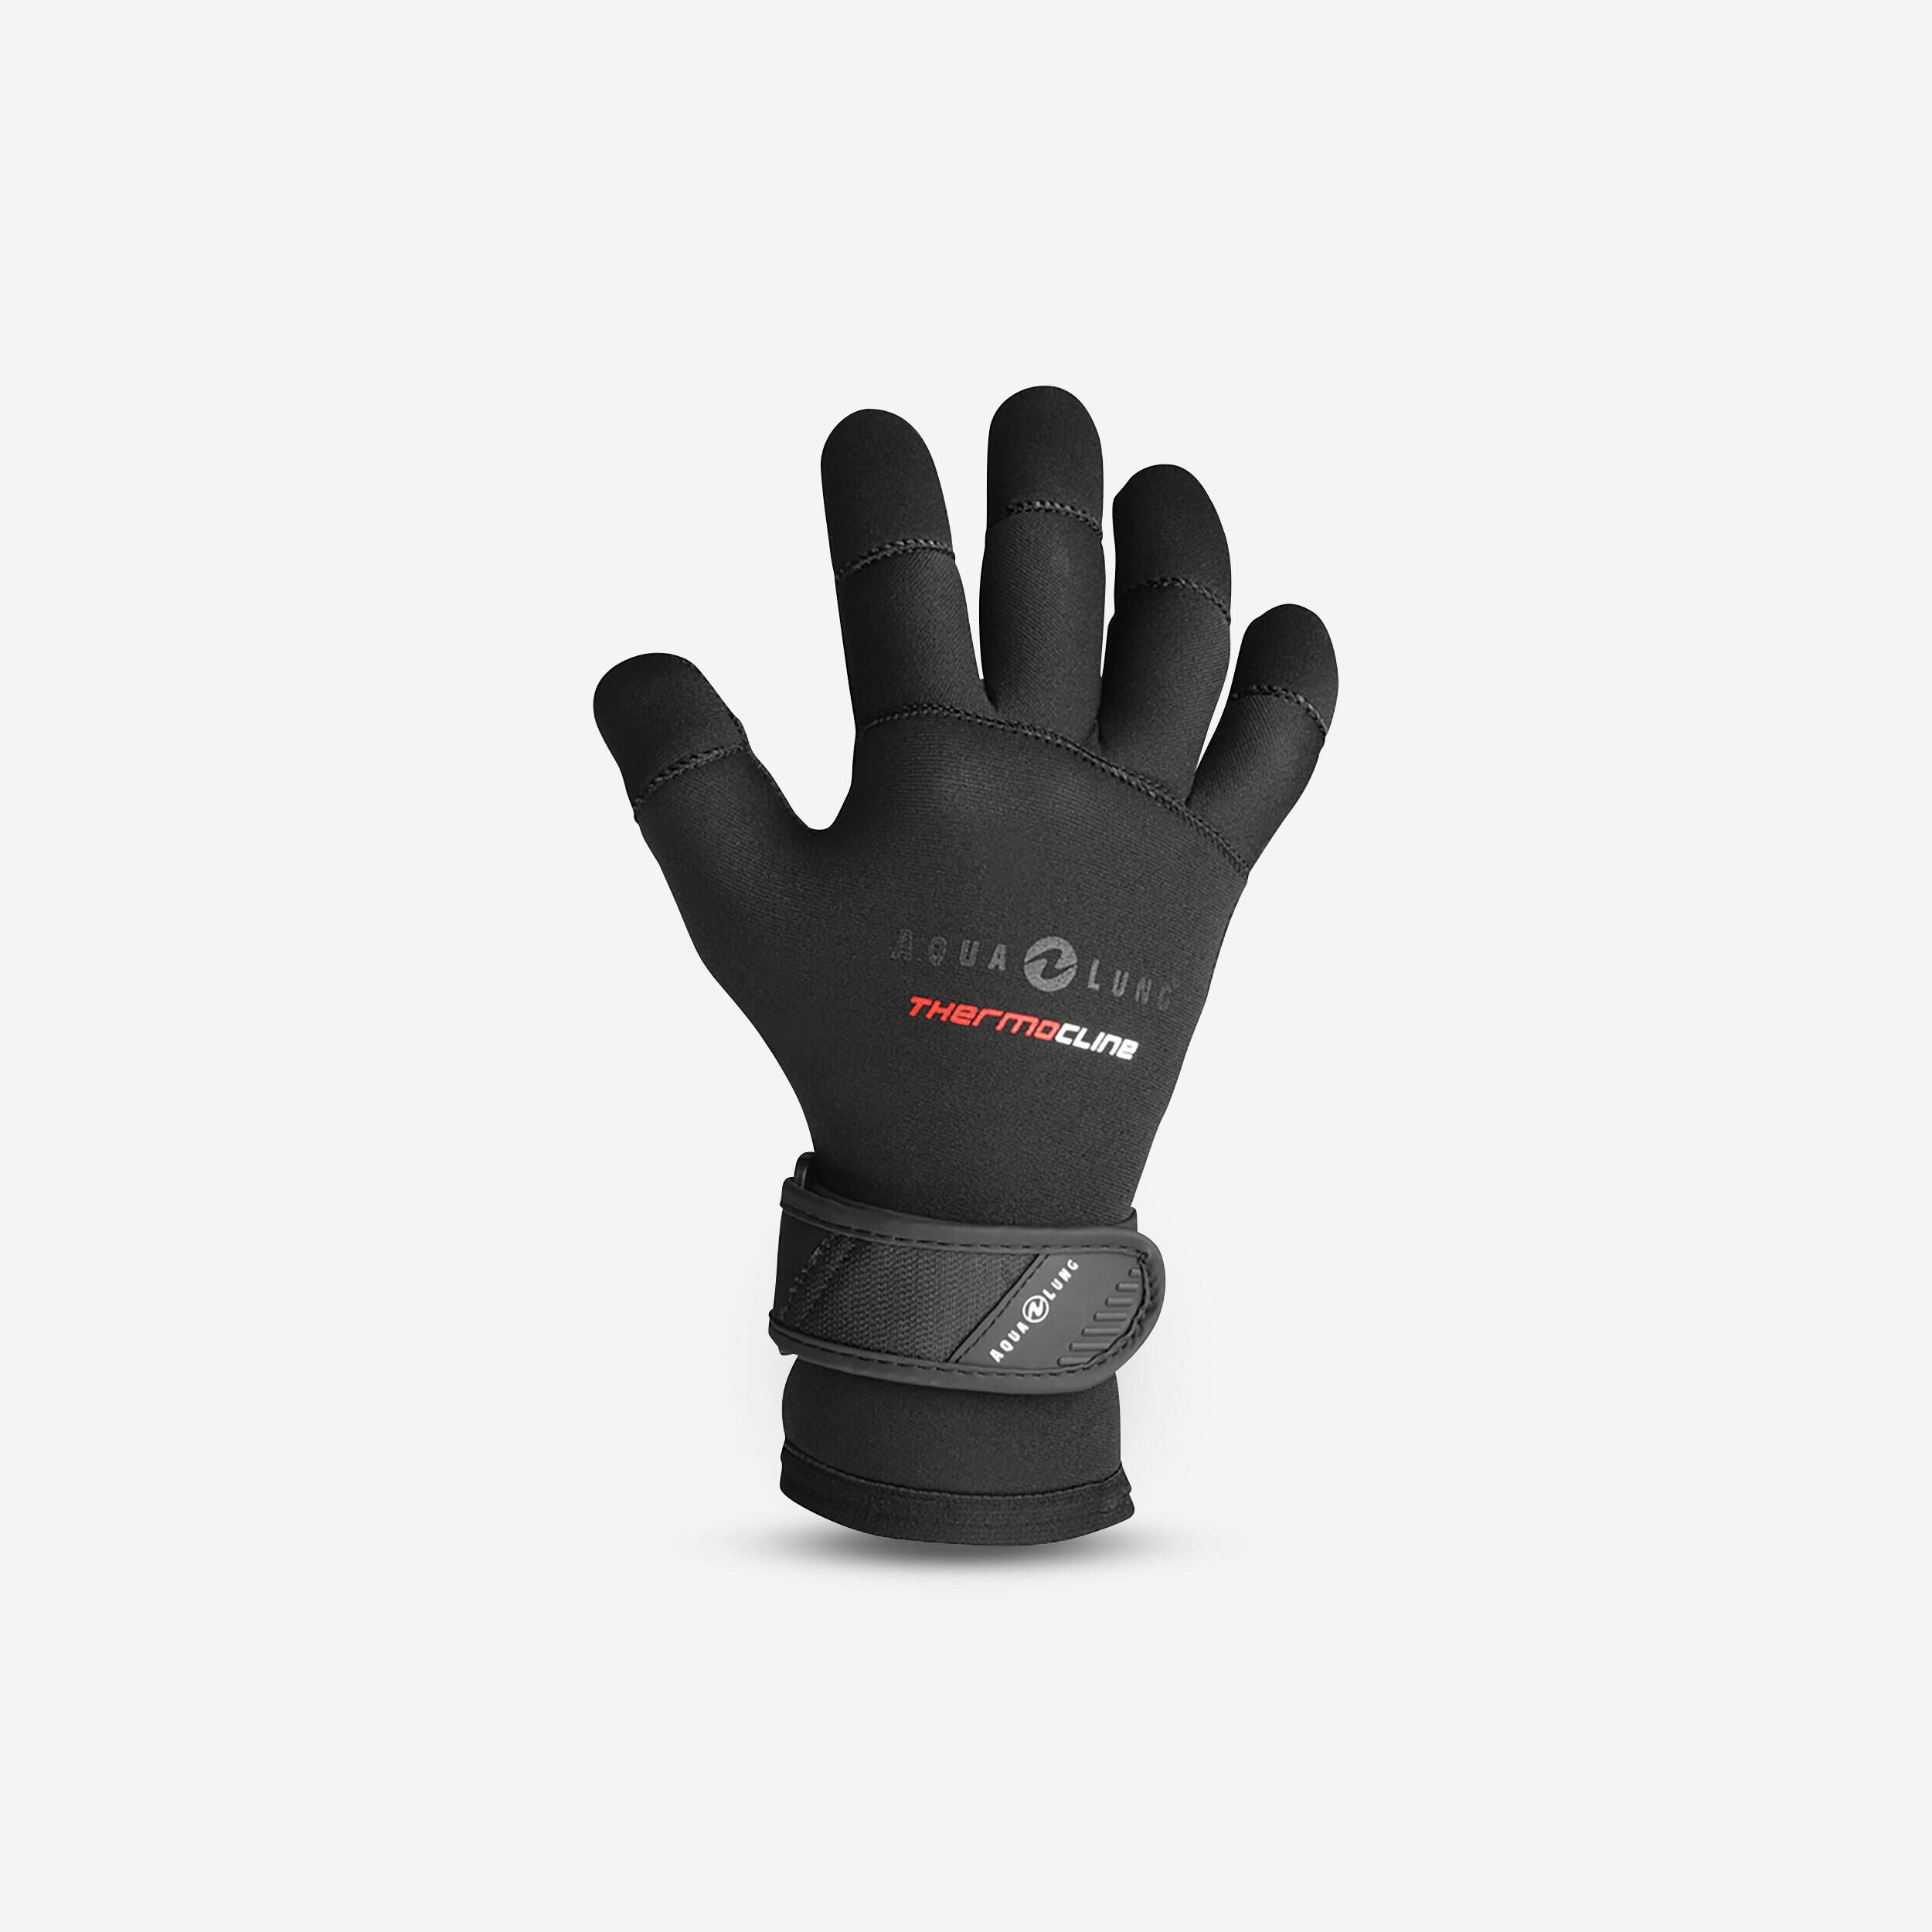 AQUALUNG Gloves THERMOCLINE 3mm black